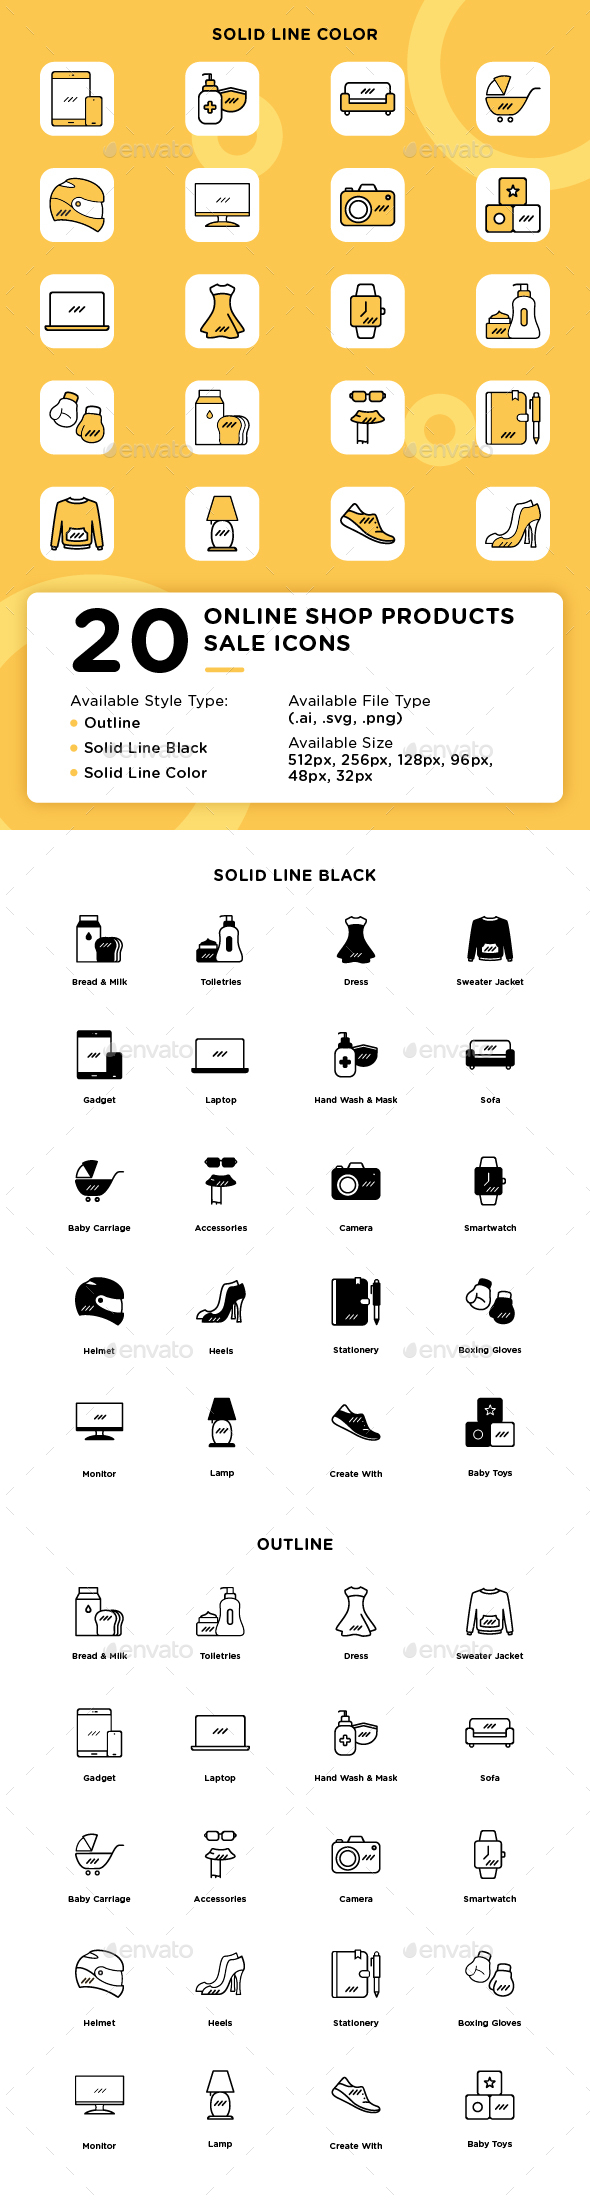 Online Shop Products Sale Icons Pack